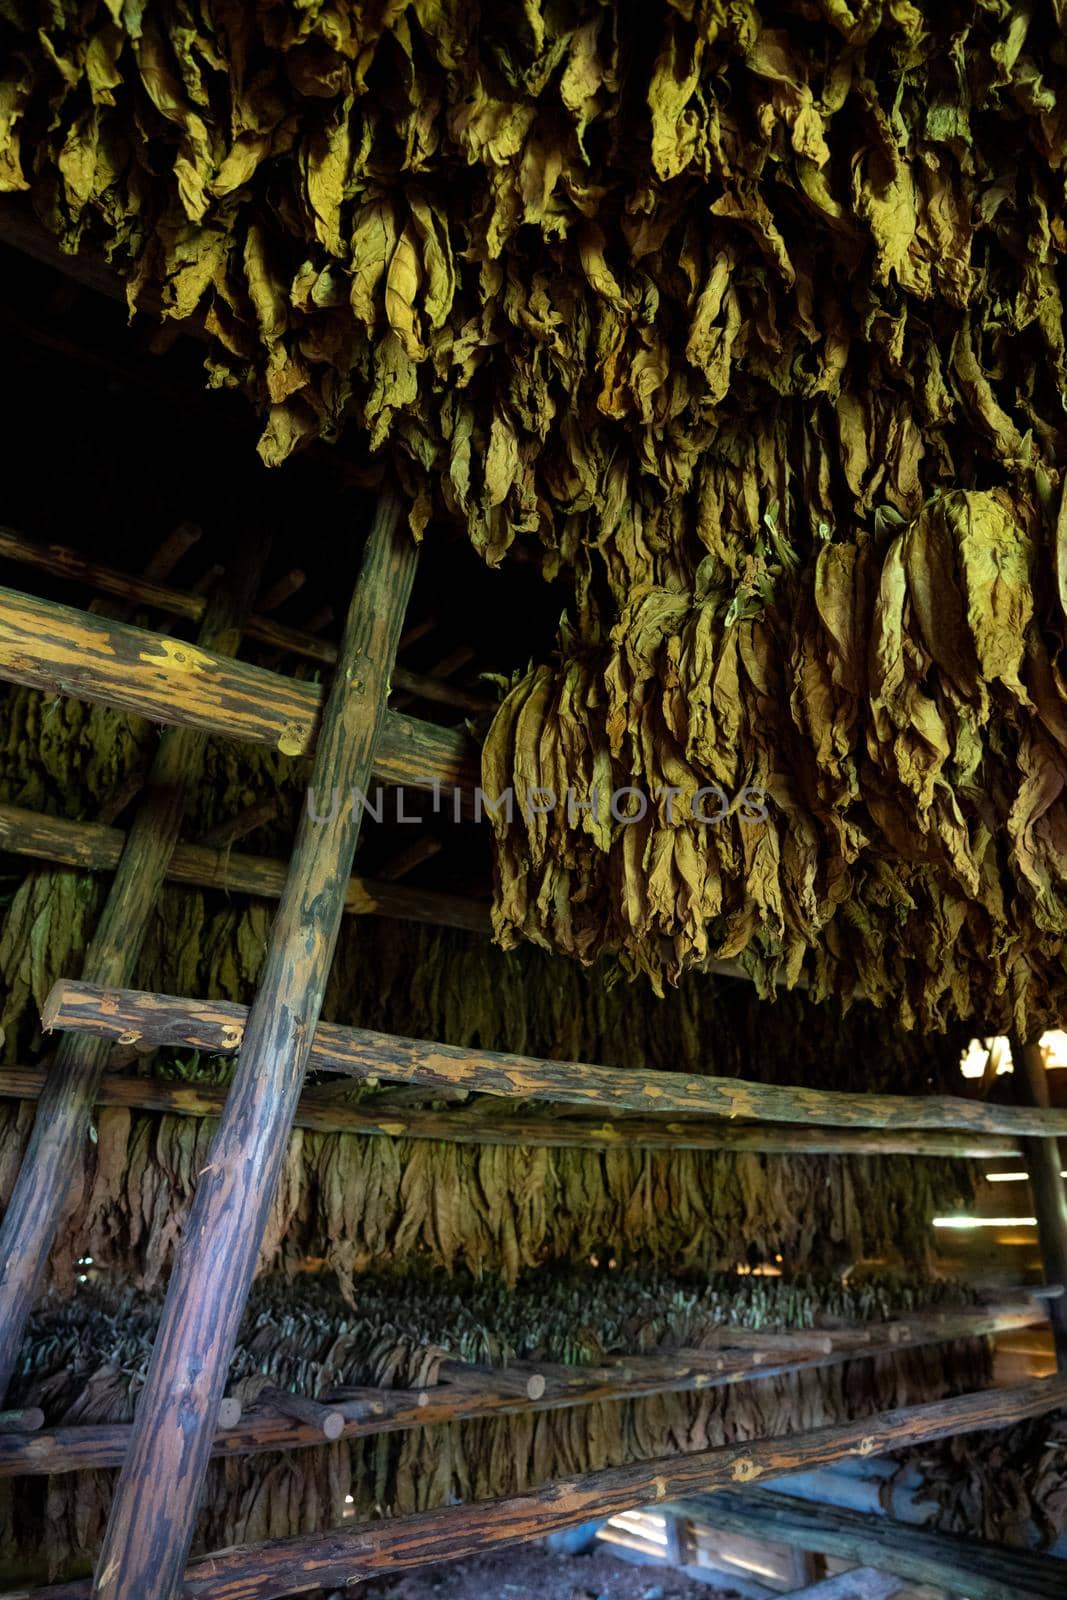 Tobacco drying, inside a shed or barn for drying tobacco leaves in Cuba by Arsgera